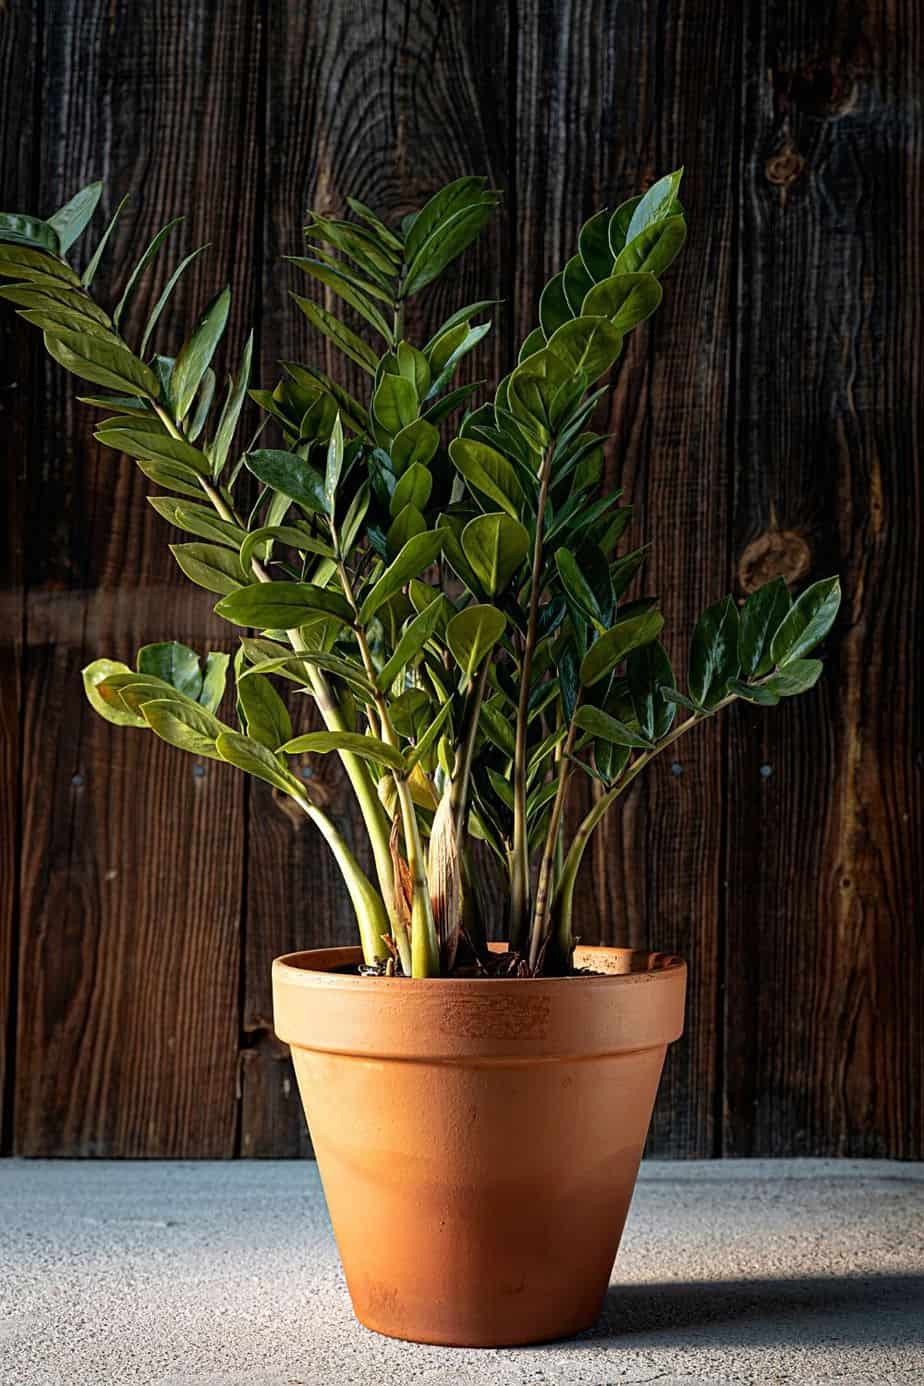 If you're cleaning your ZZ plant's leaves with the swish bucket method, make sure to dry it in a shady area